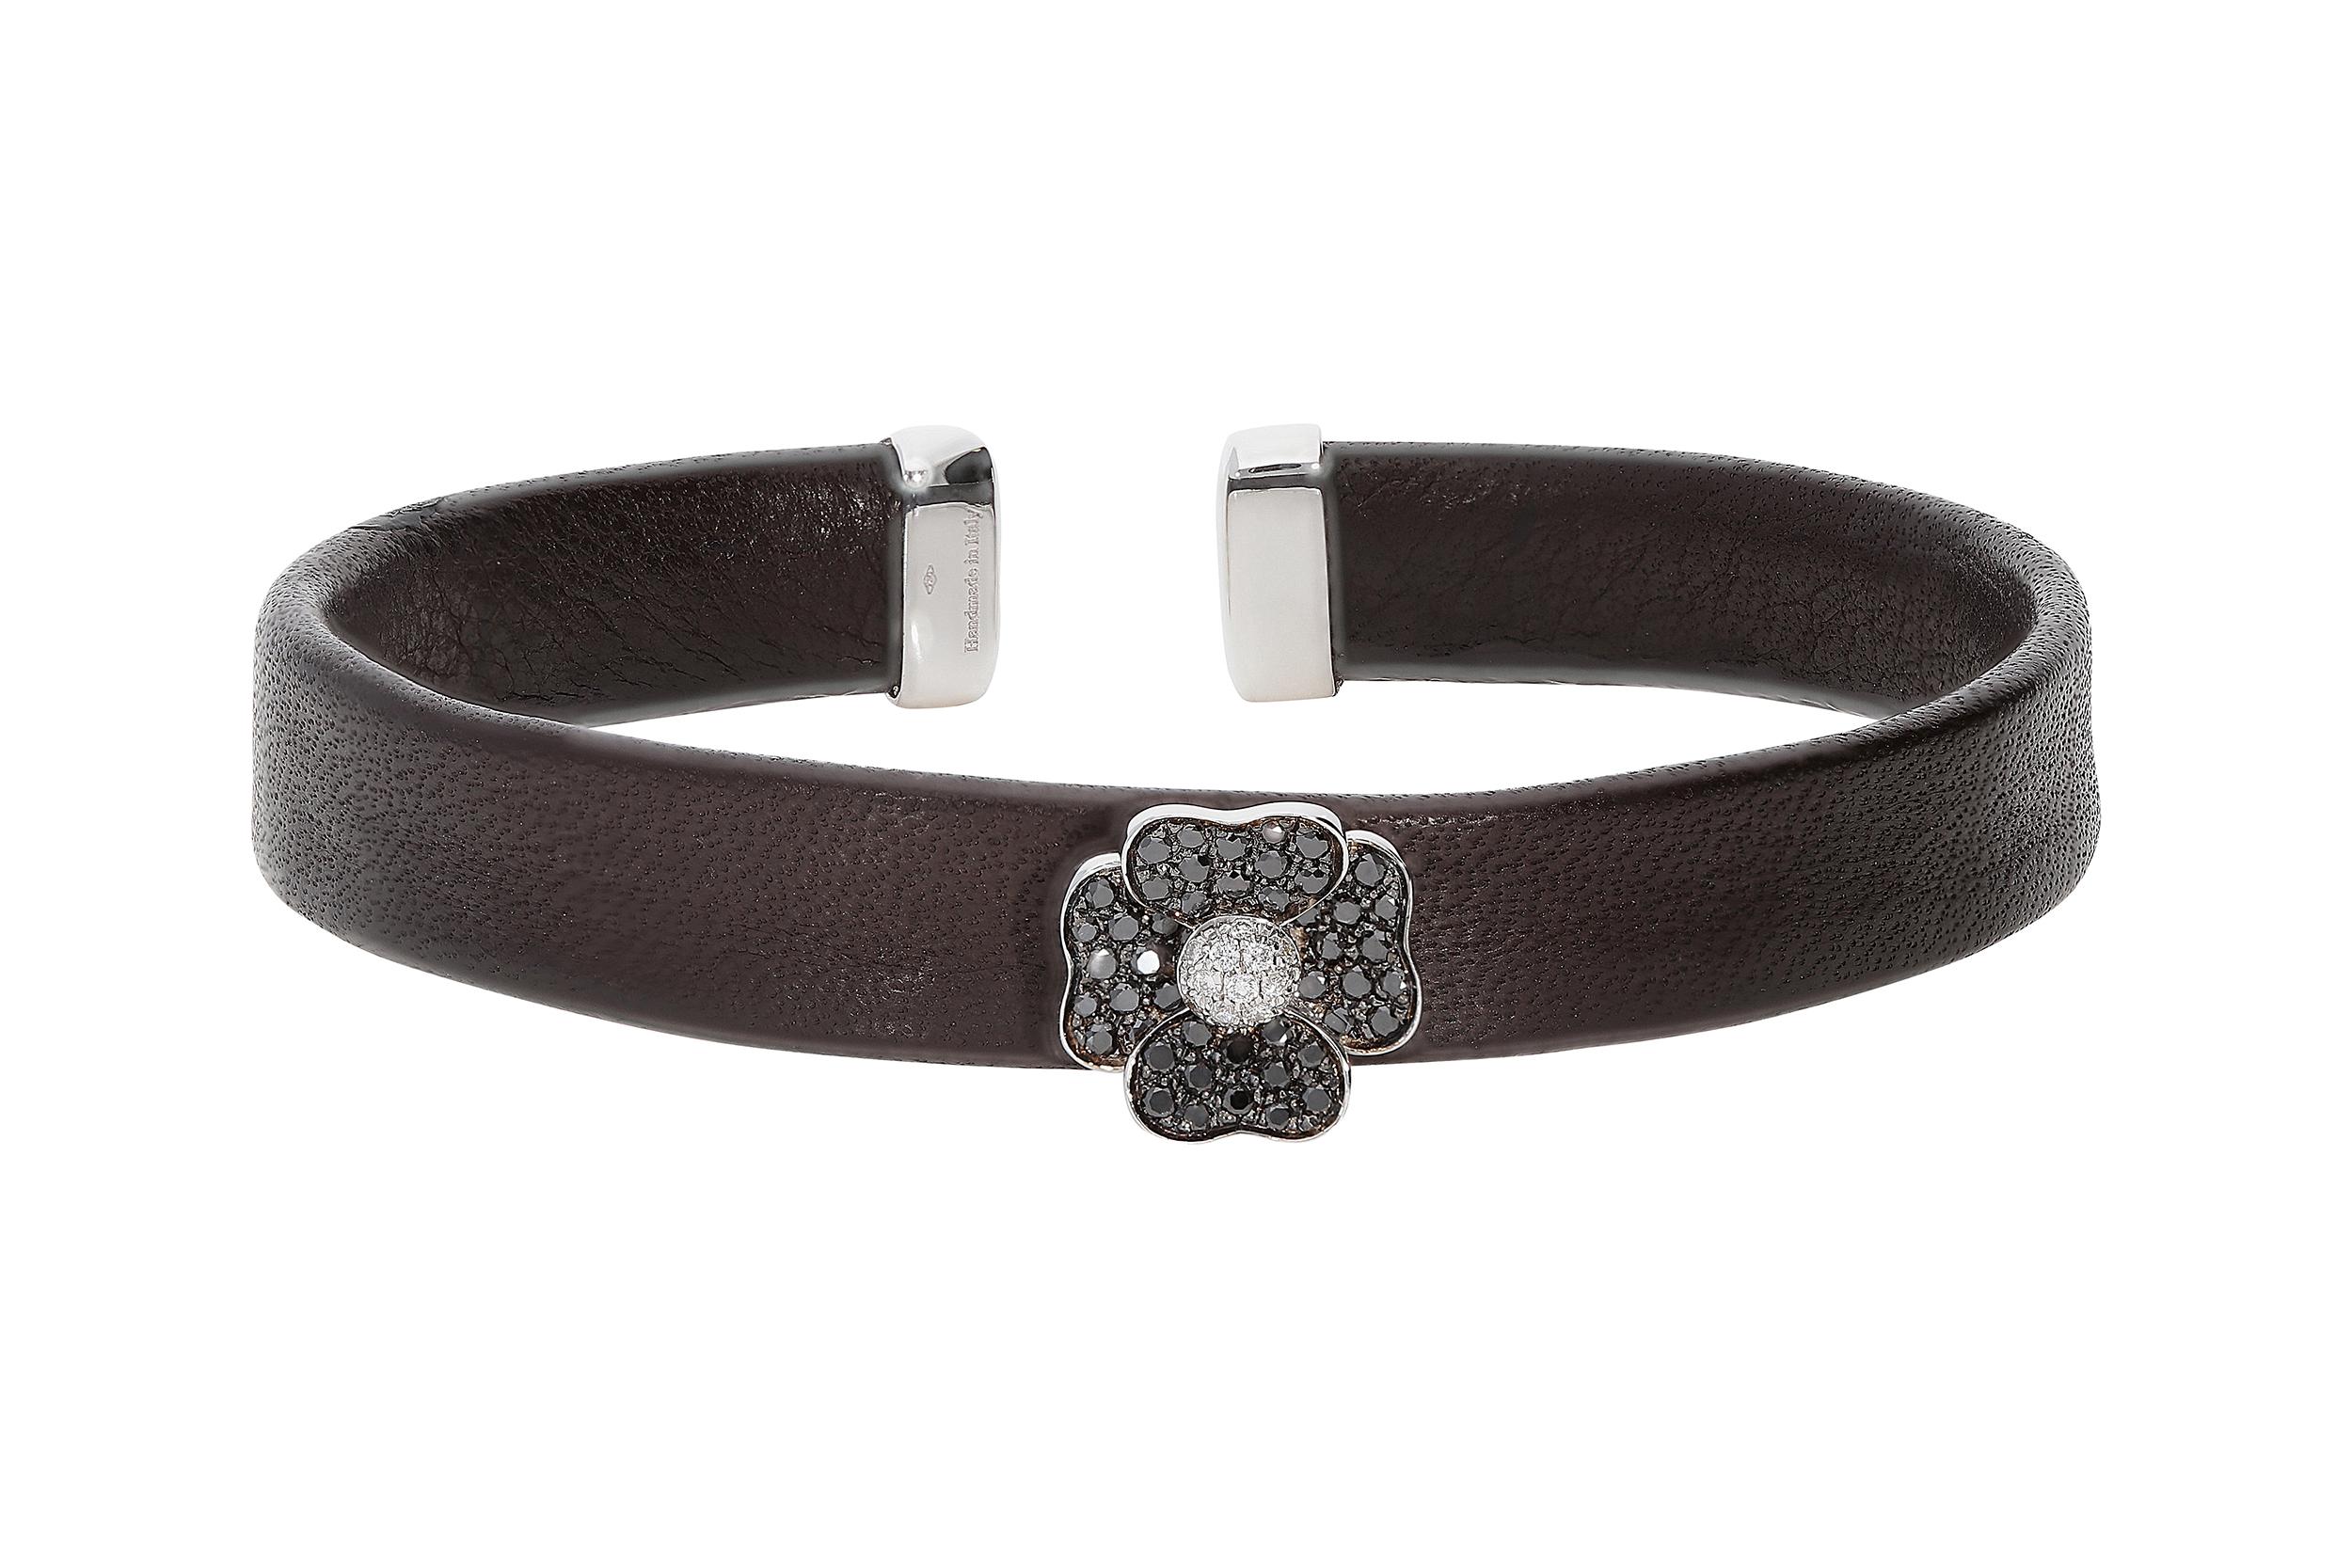 Fashion bracelet in 18kt white gold for 3,10 grams with flexible core brown leather.
The height of the leather is 0,90 centimeters and the wrist size is 5.50x4.50 centimeters.
The flower has got the pistil set with 0,05 carats of white round